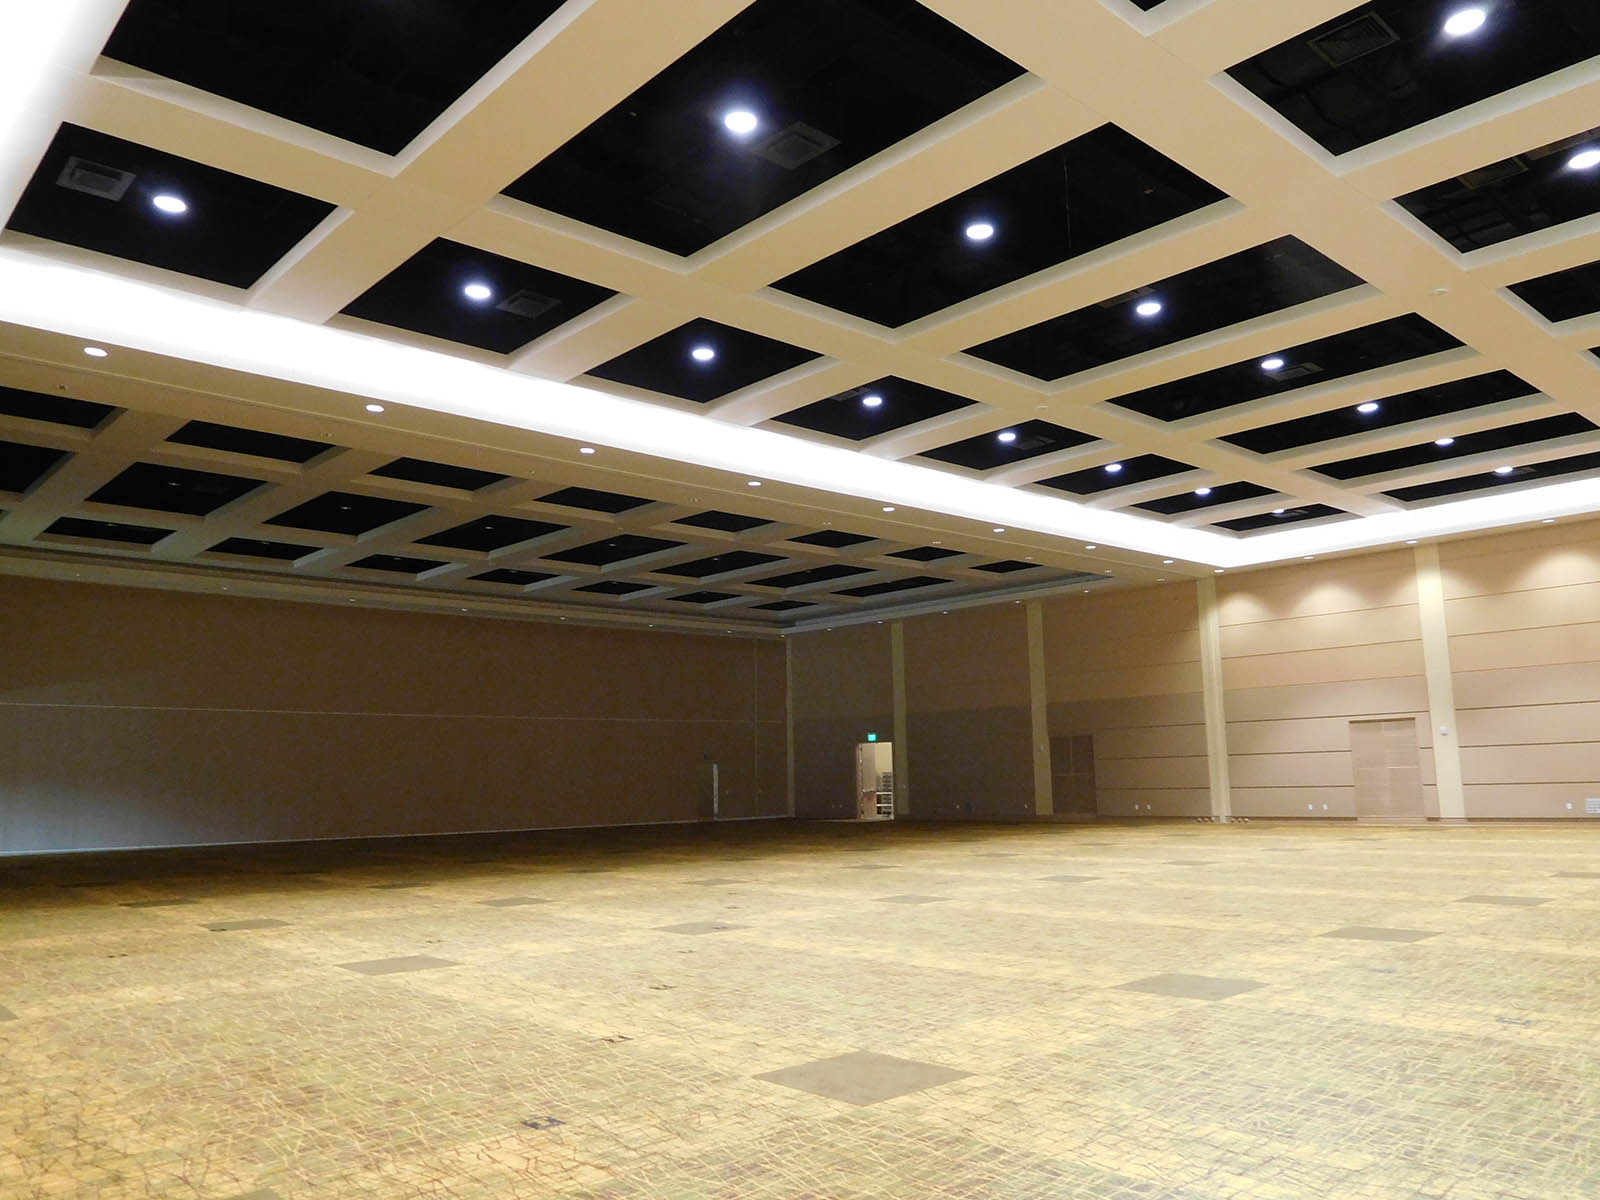 Large ballroom with overhead recessed lighting system